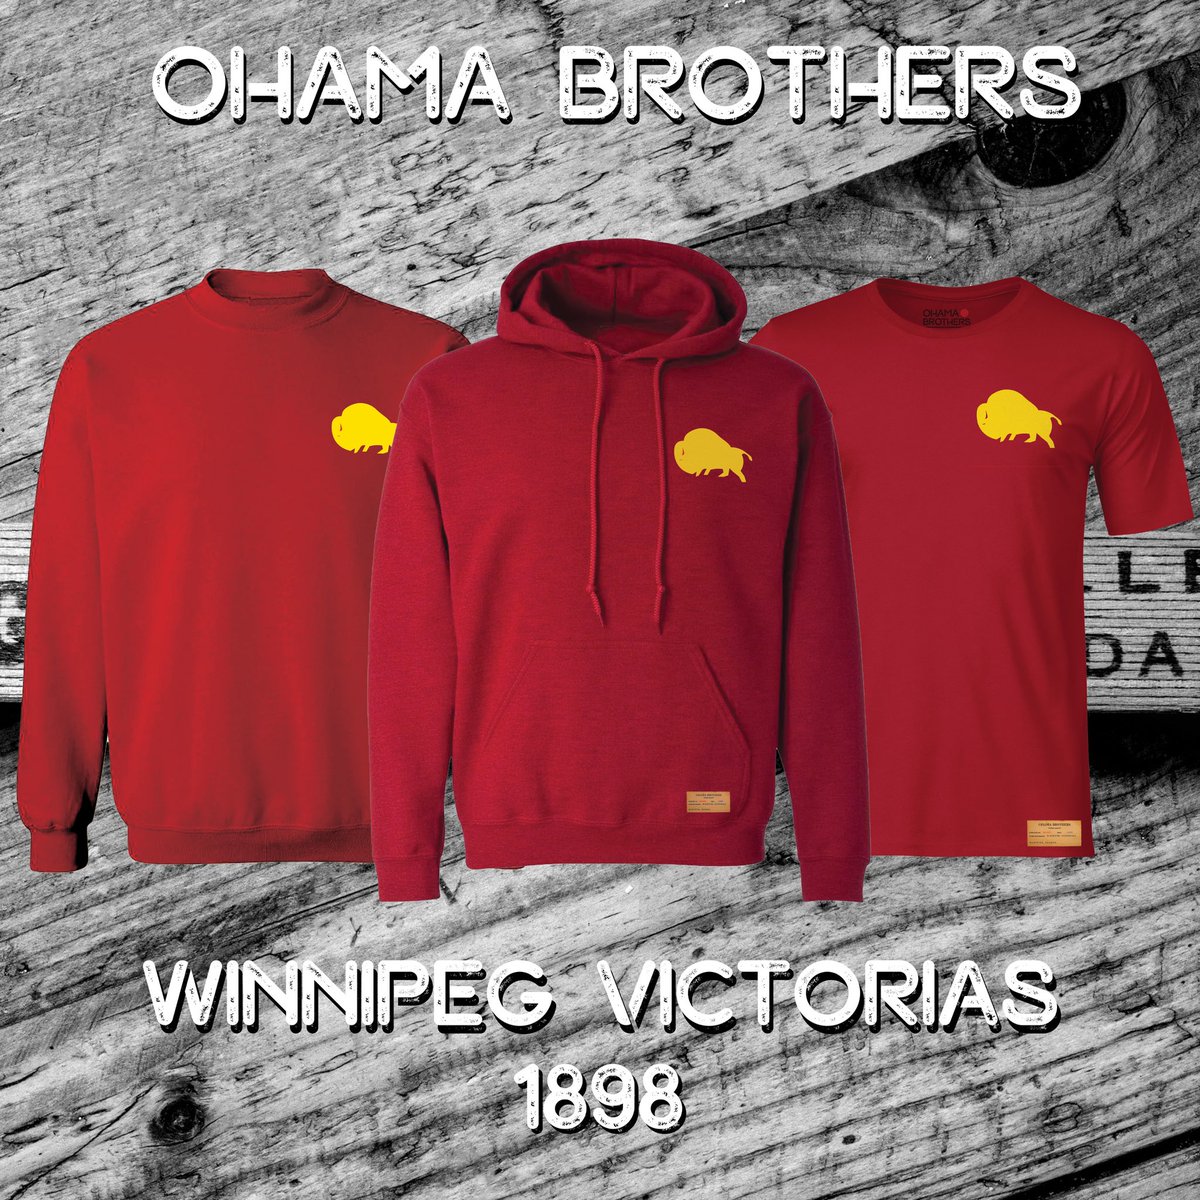 Introducing the Winnipeg Victorias! 🦬

The Winnipeg Victorias won the Stanley Cup in 1896, 1901 and 1902. The Victorias continued in senior-level amateur play, winning the Allan Cup in 1911 and 1912.

#yeg #odr #winnipeg #peg #vintagehockey #stanleycup #allancup